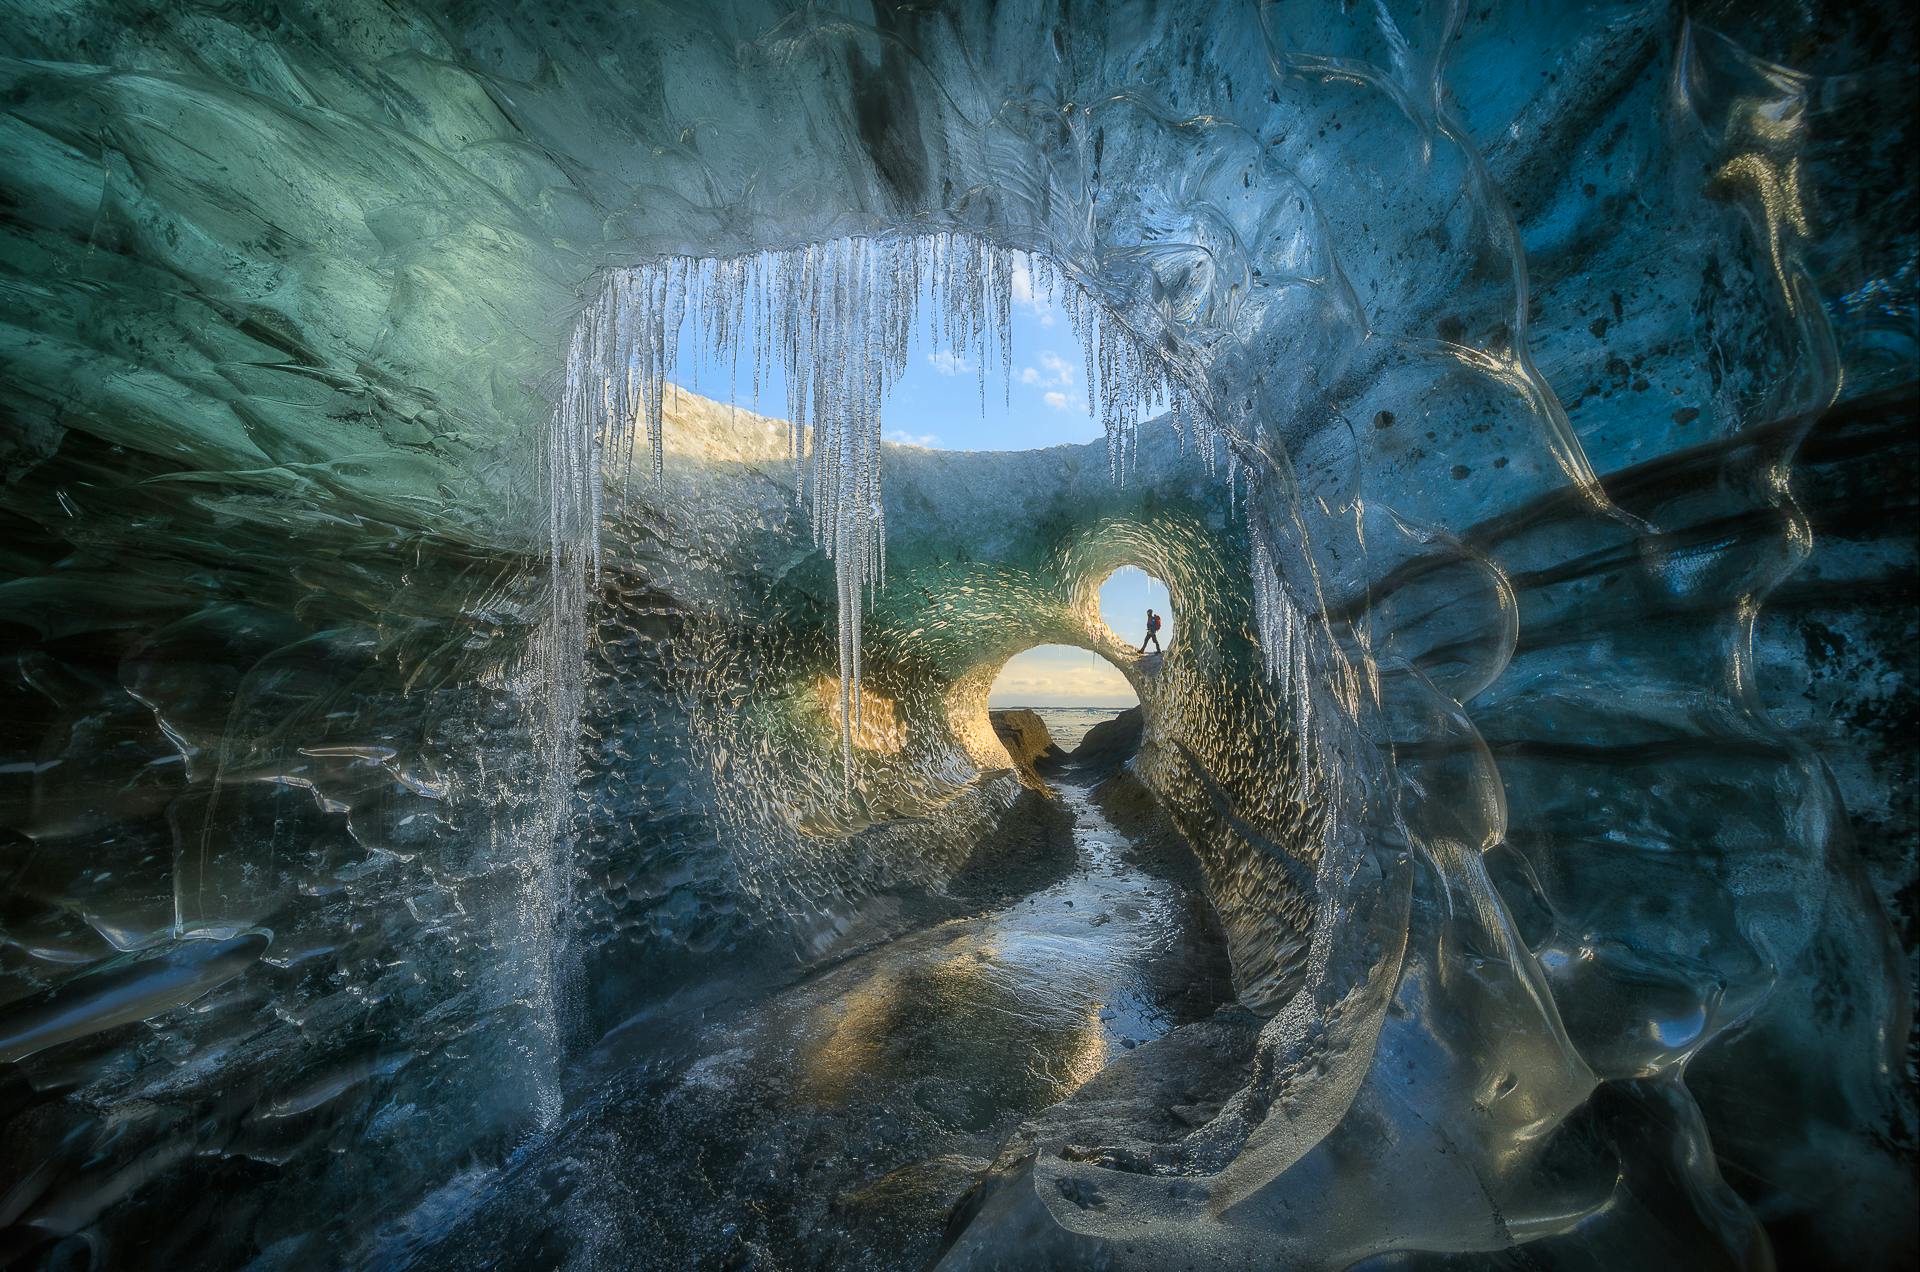 A visit to a mesmerising blue ice cave is something that will stay with you for a lifetime